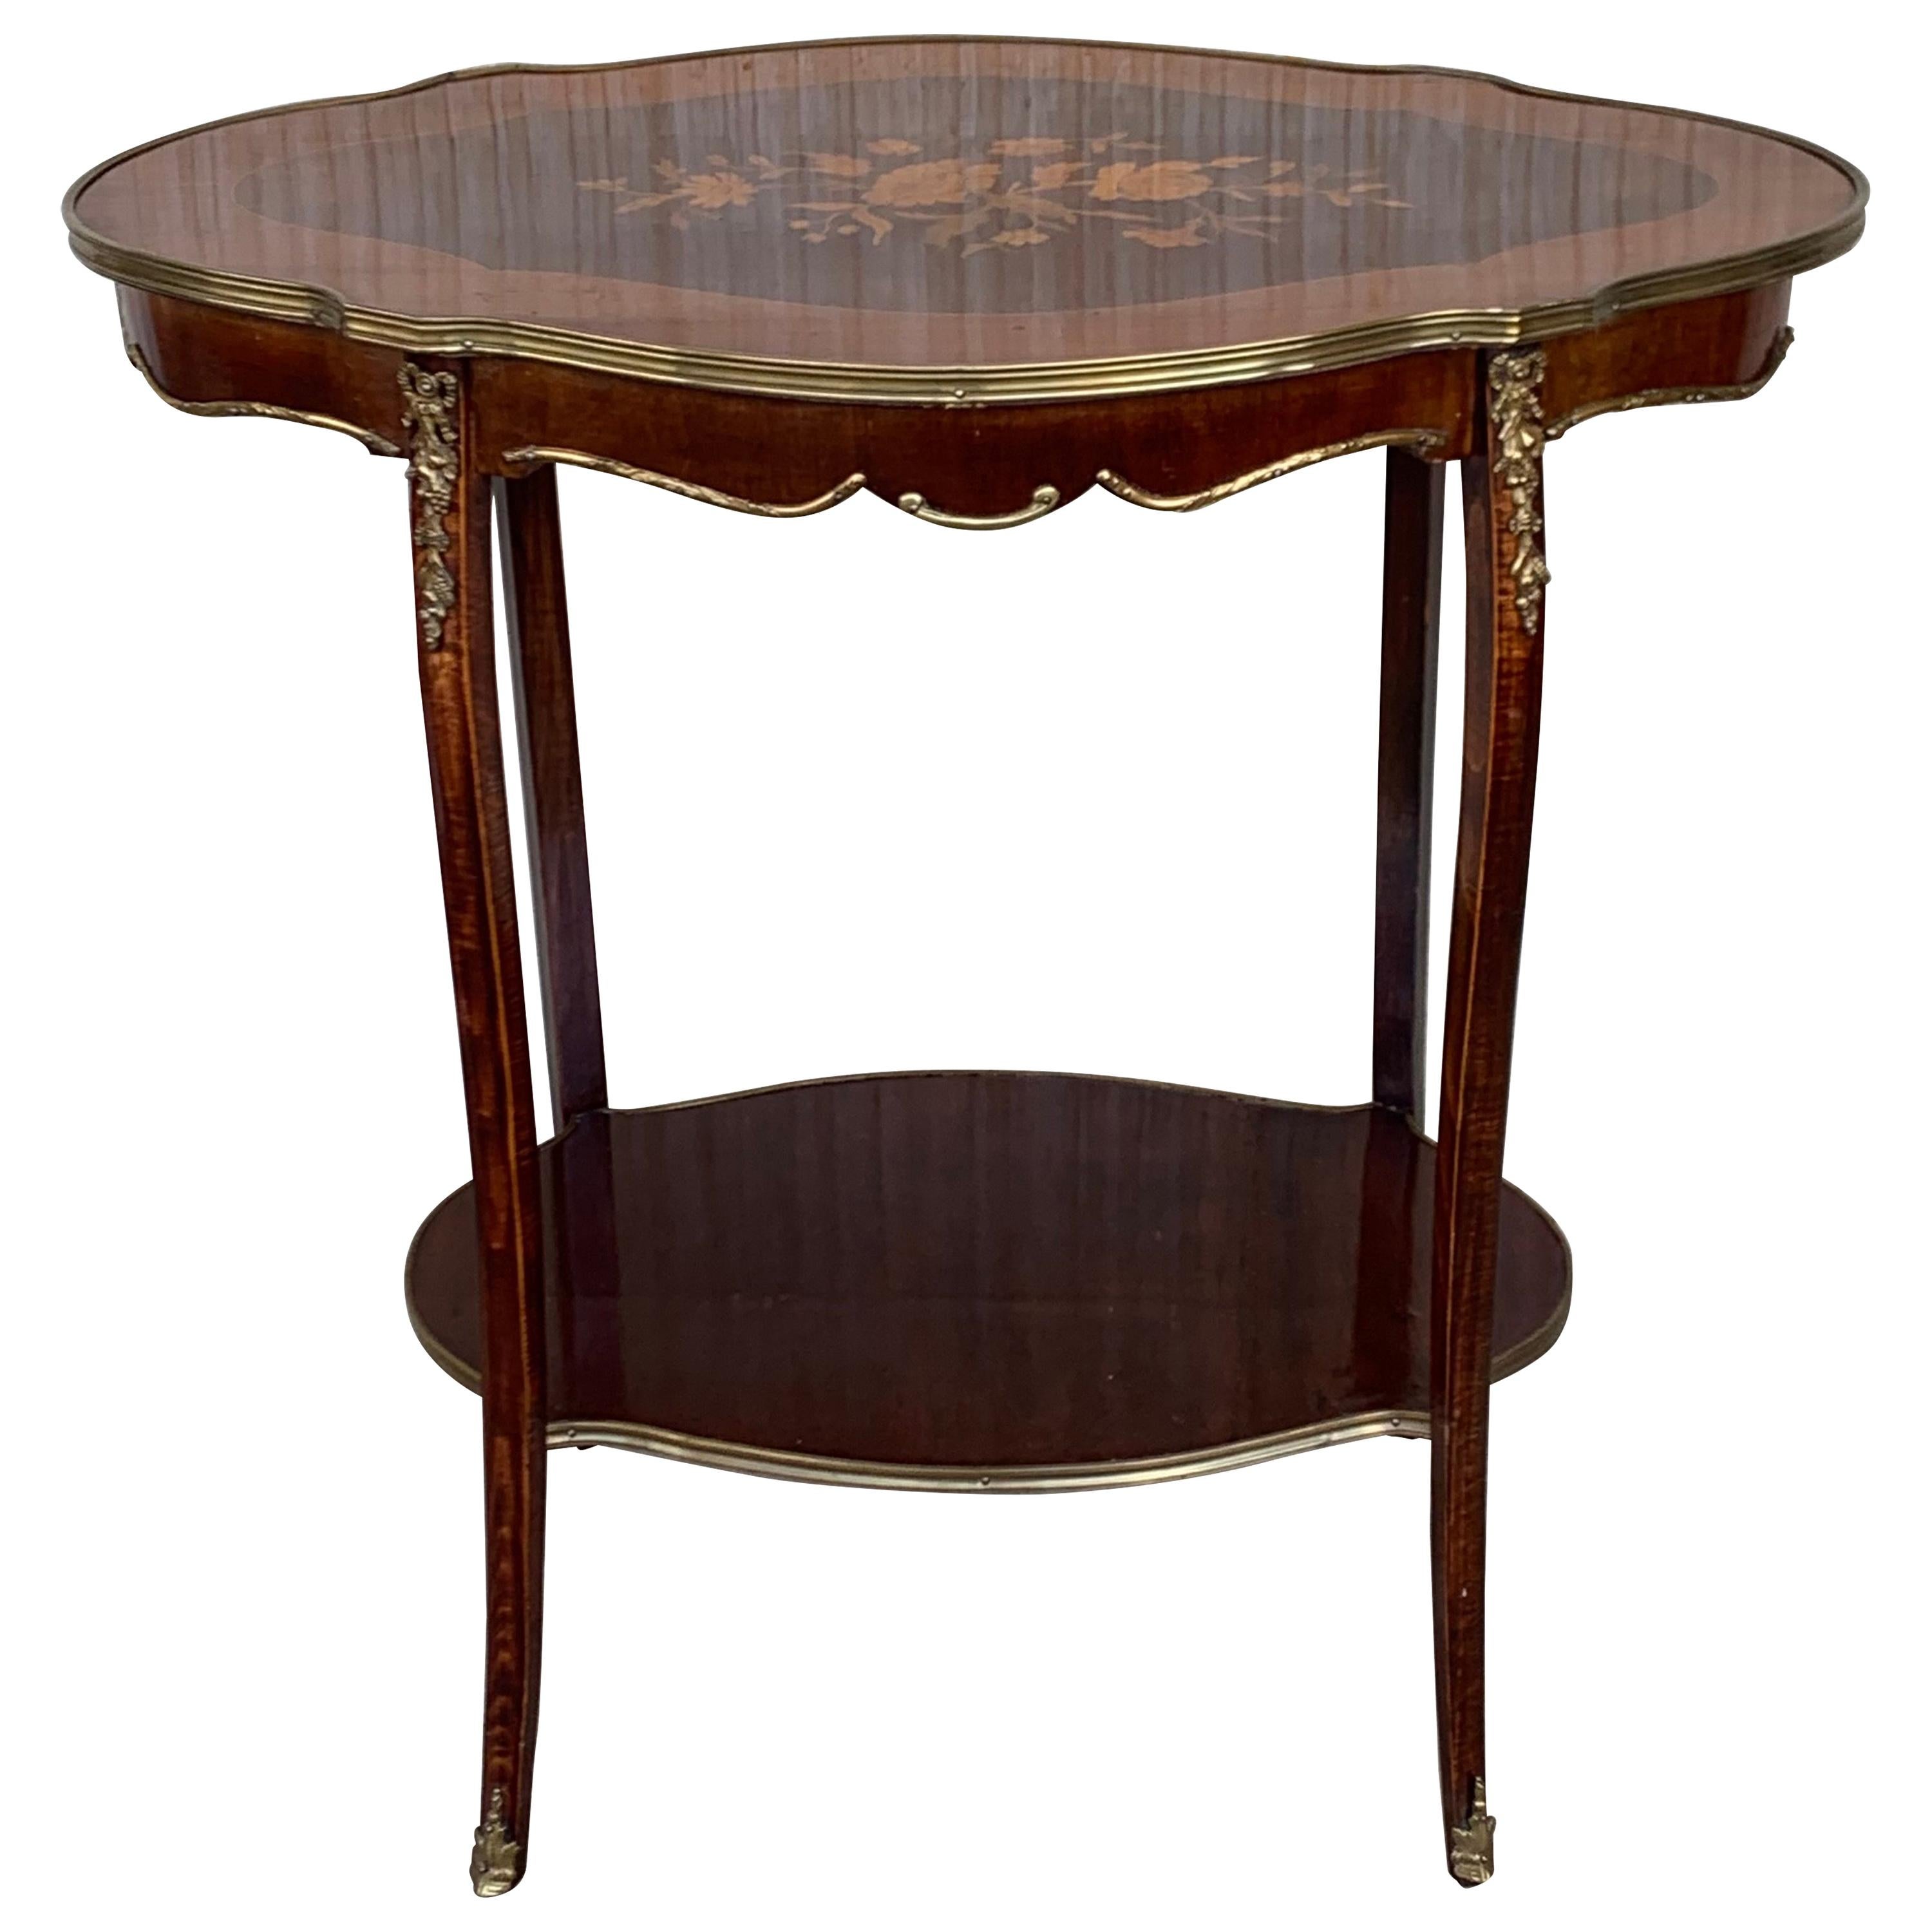 French 19th Century Table Louis XV Style with Floral Marquetry and Gilt Bronze